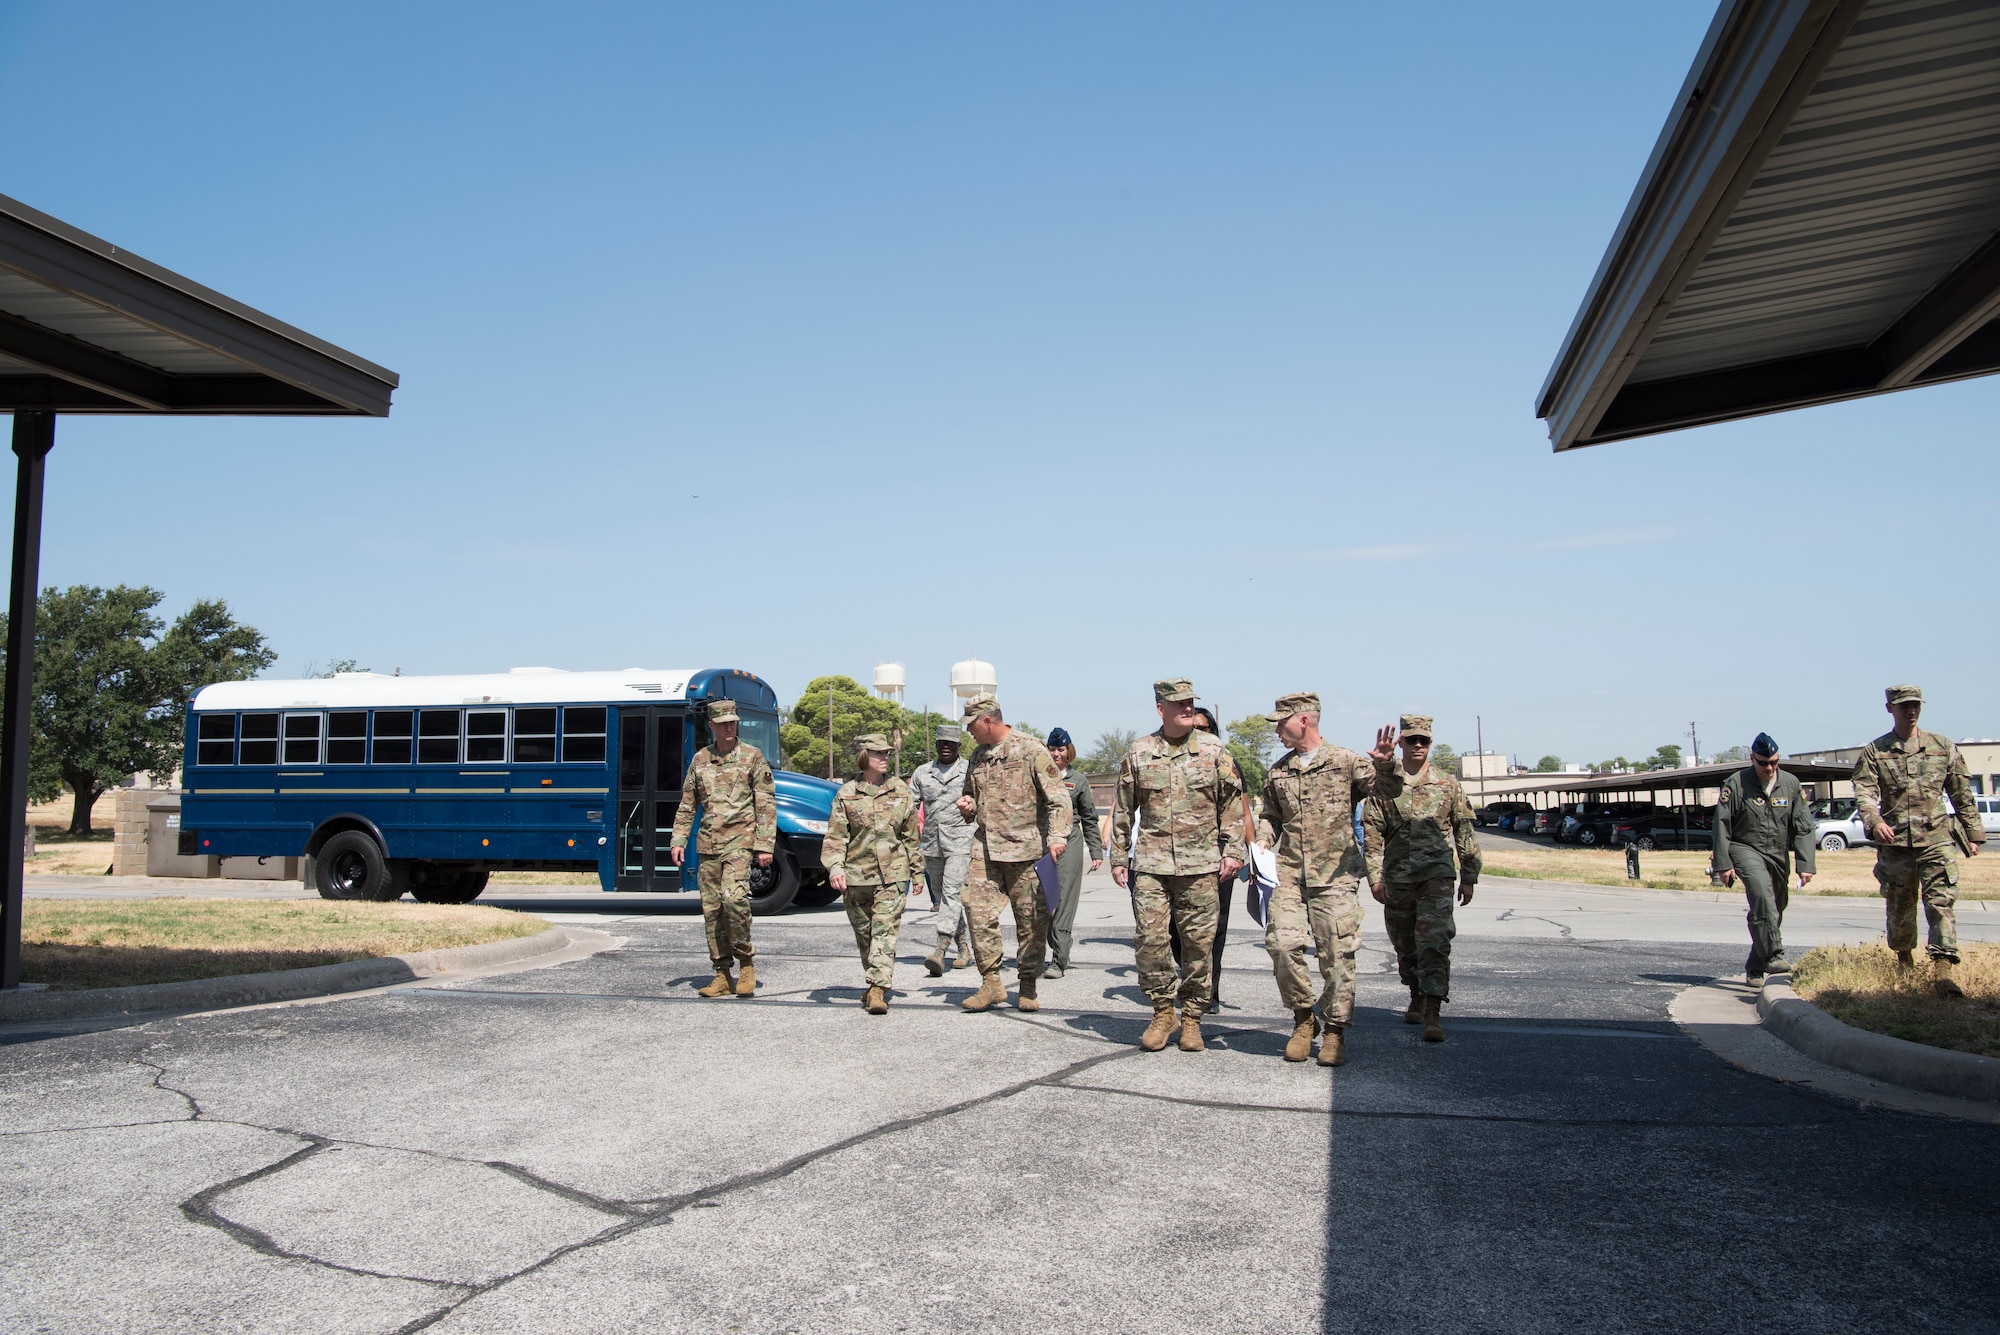 Lt. Gen. Brad Webb, commander of Air Education and Training Command (AETC), and Chief Master Sgt. Juliet Gudgel, the Command Chief Master Sergeant of AETC, visit with members of the 47th Flying Training Wing’s senior leadership during an immersion tour Aug. 14, 2019, at Laughlin Air Force Base, Texas. Laughlin is one of only three bases that conducts specialized undergraduate pilot training for the U.S. Air Force. (U.S. Air Force photo by Staff Sgt. Benjamin N. Valmoja).